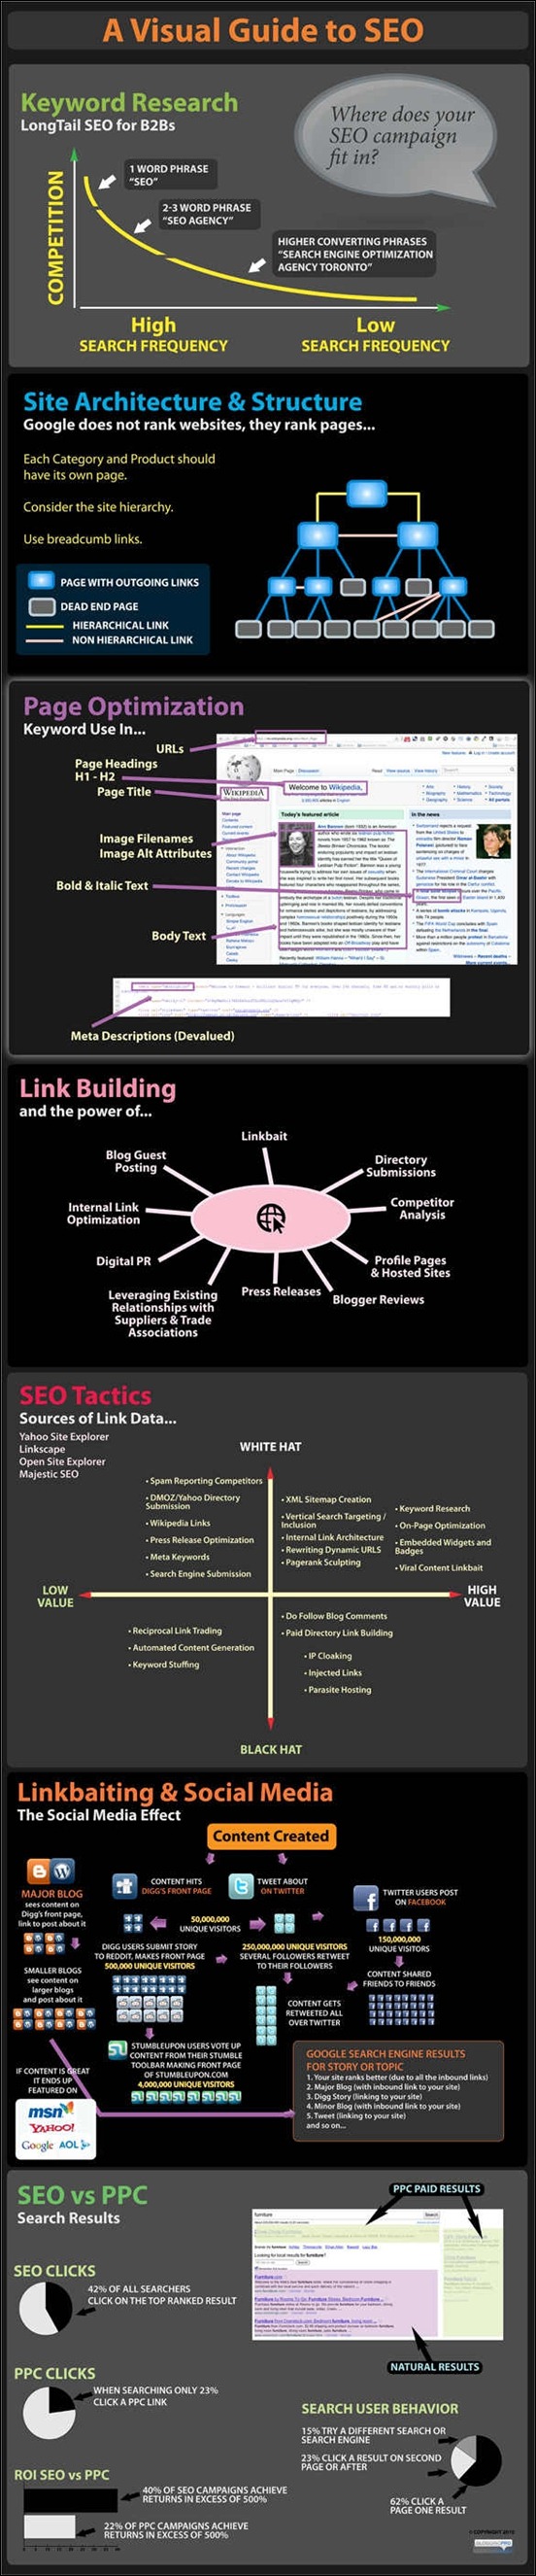 the-complete-guide-to-seo